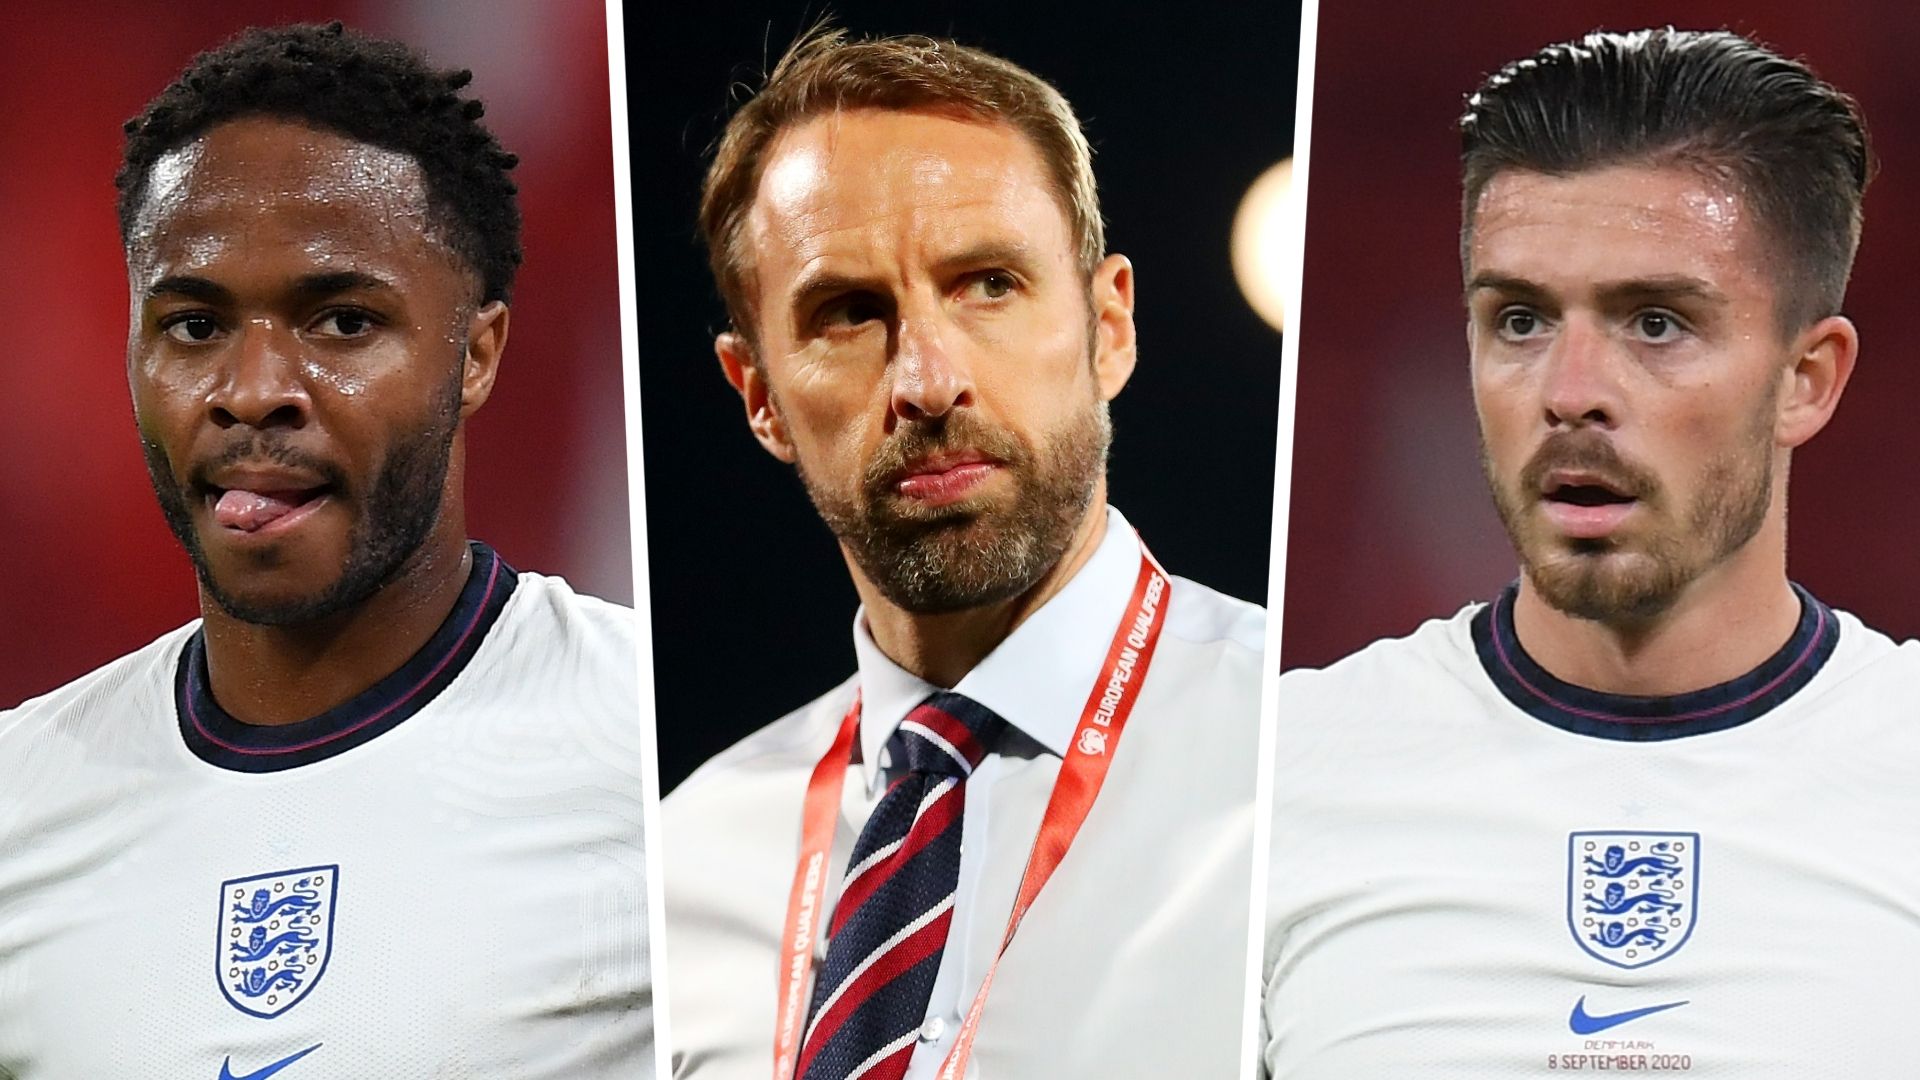 England Euro 2020 Squad: Who Has Made Southgate's Provisional 33 Man Selection & When Will It Be Cut Down?